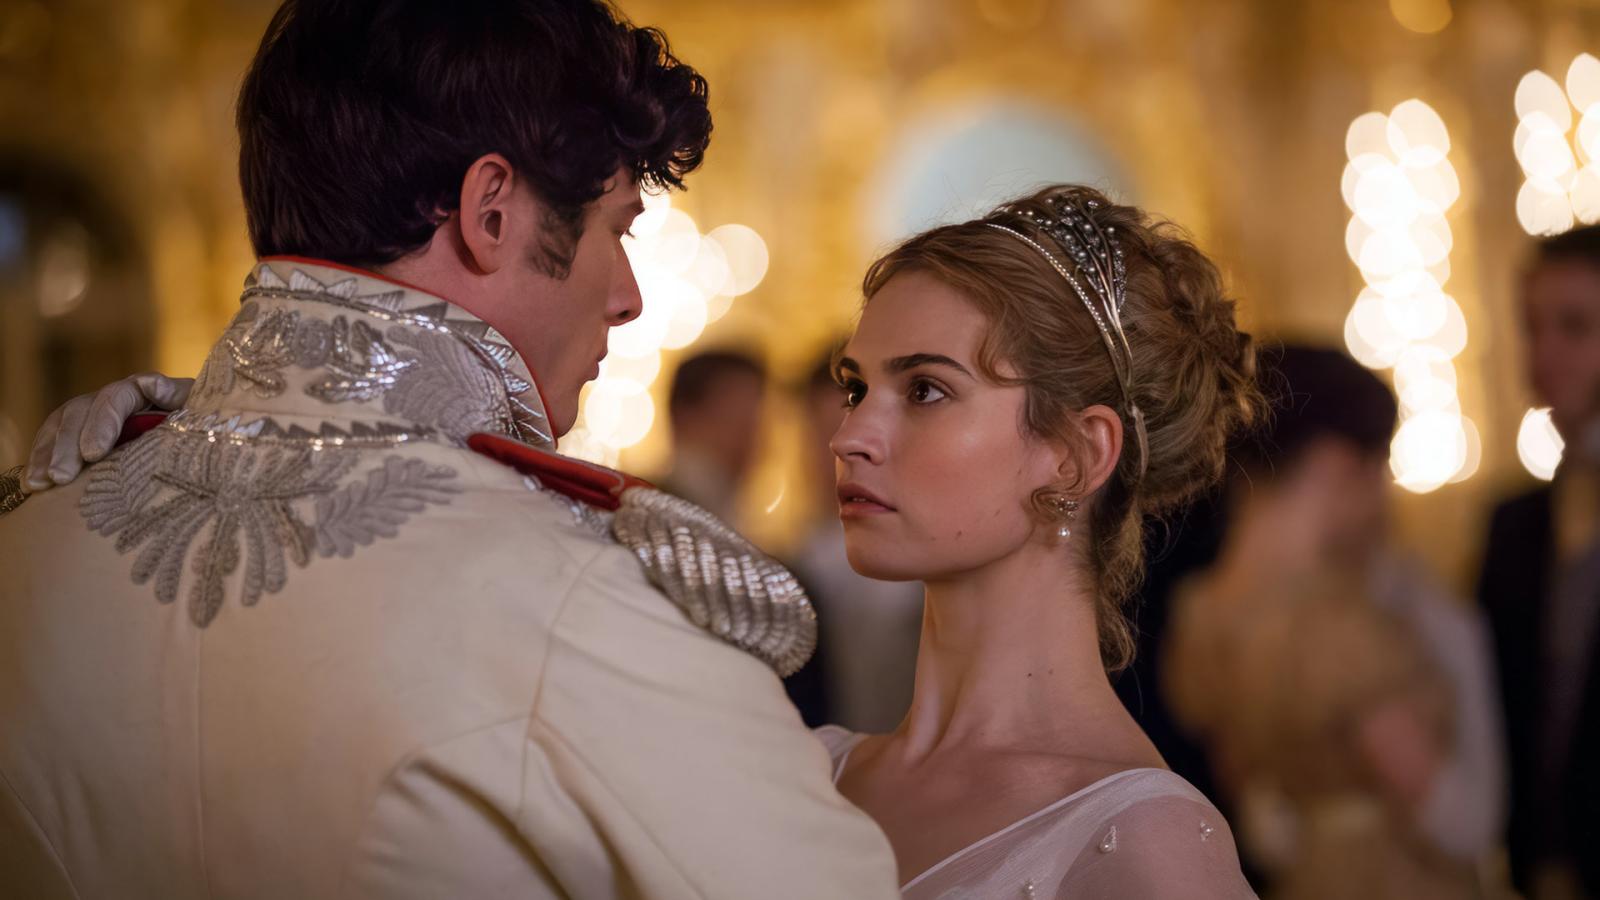 15 Historical Dramas that Capture the Pride and Prejudice Vibe - image 15